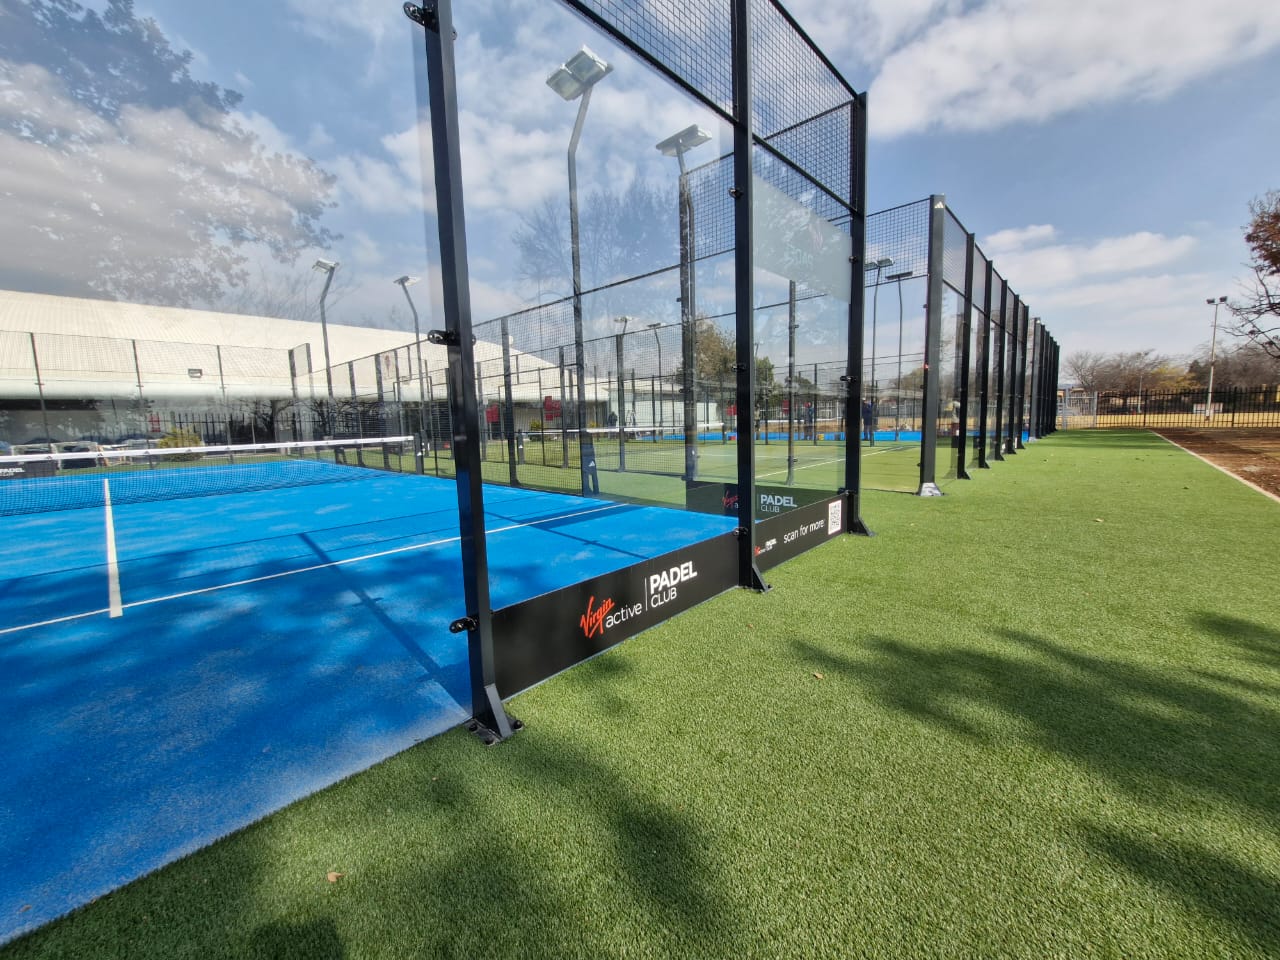 Virgin Active Padel Club Bedfordview  opens - brings number of VAPC courts in SA to over 50